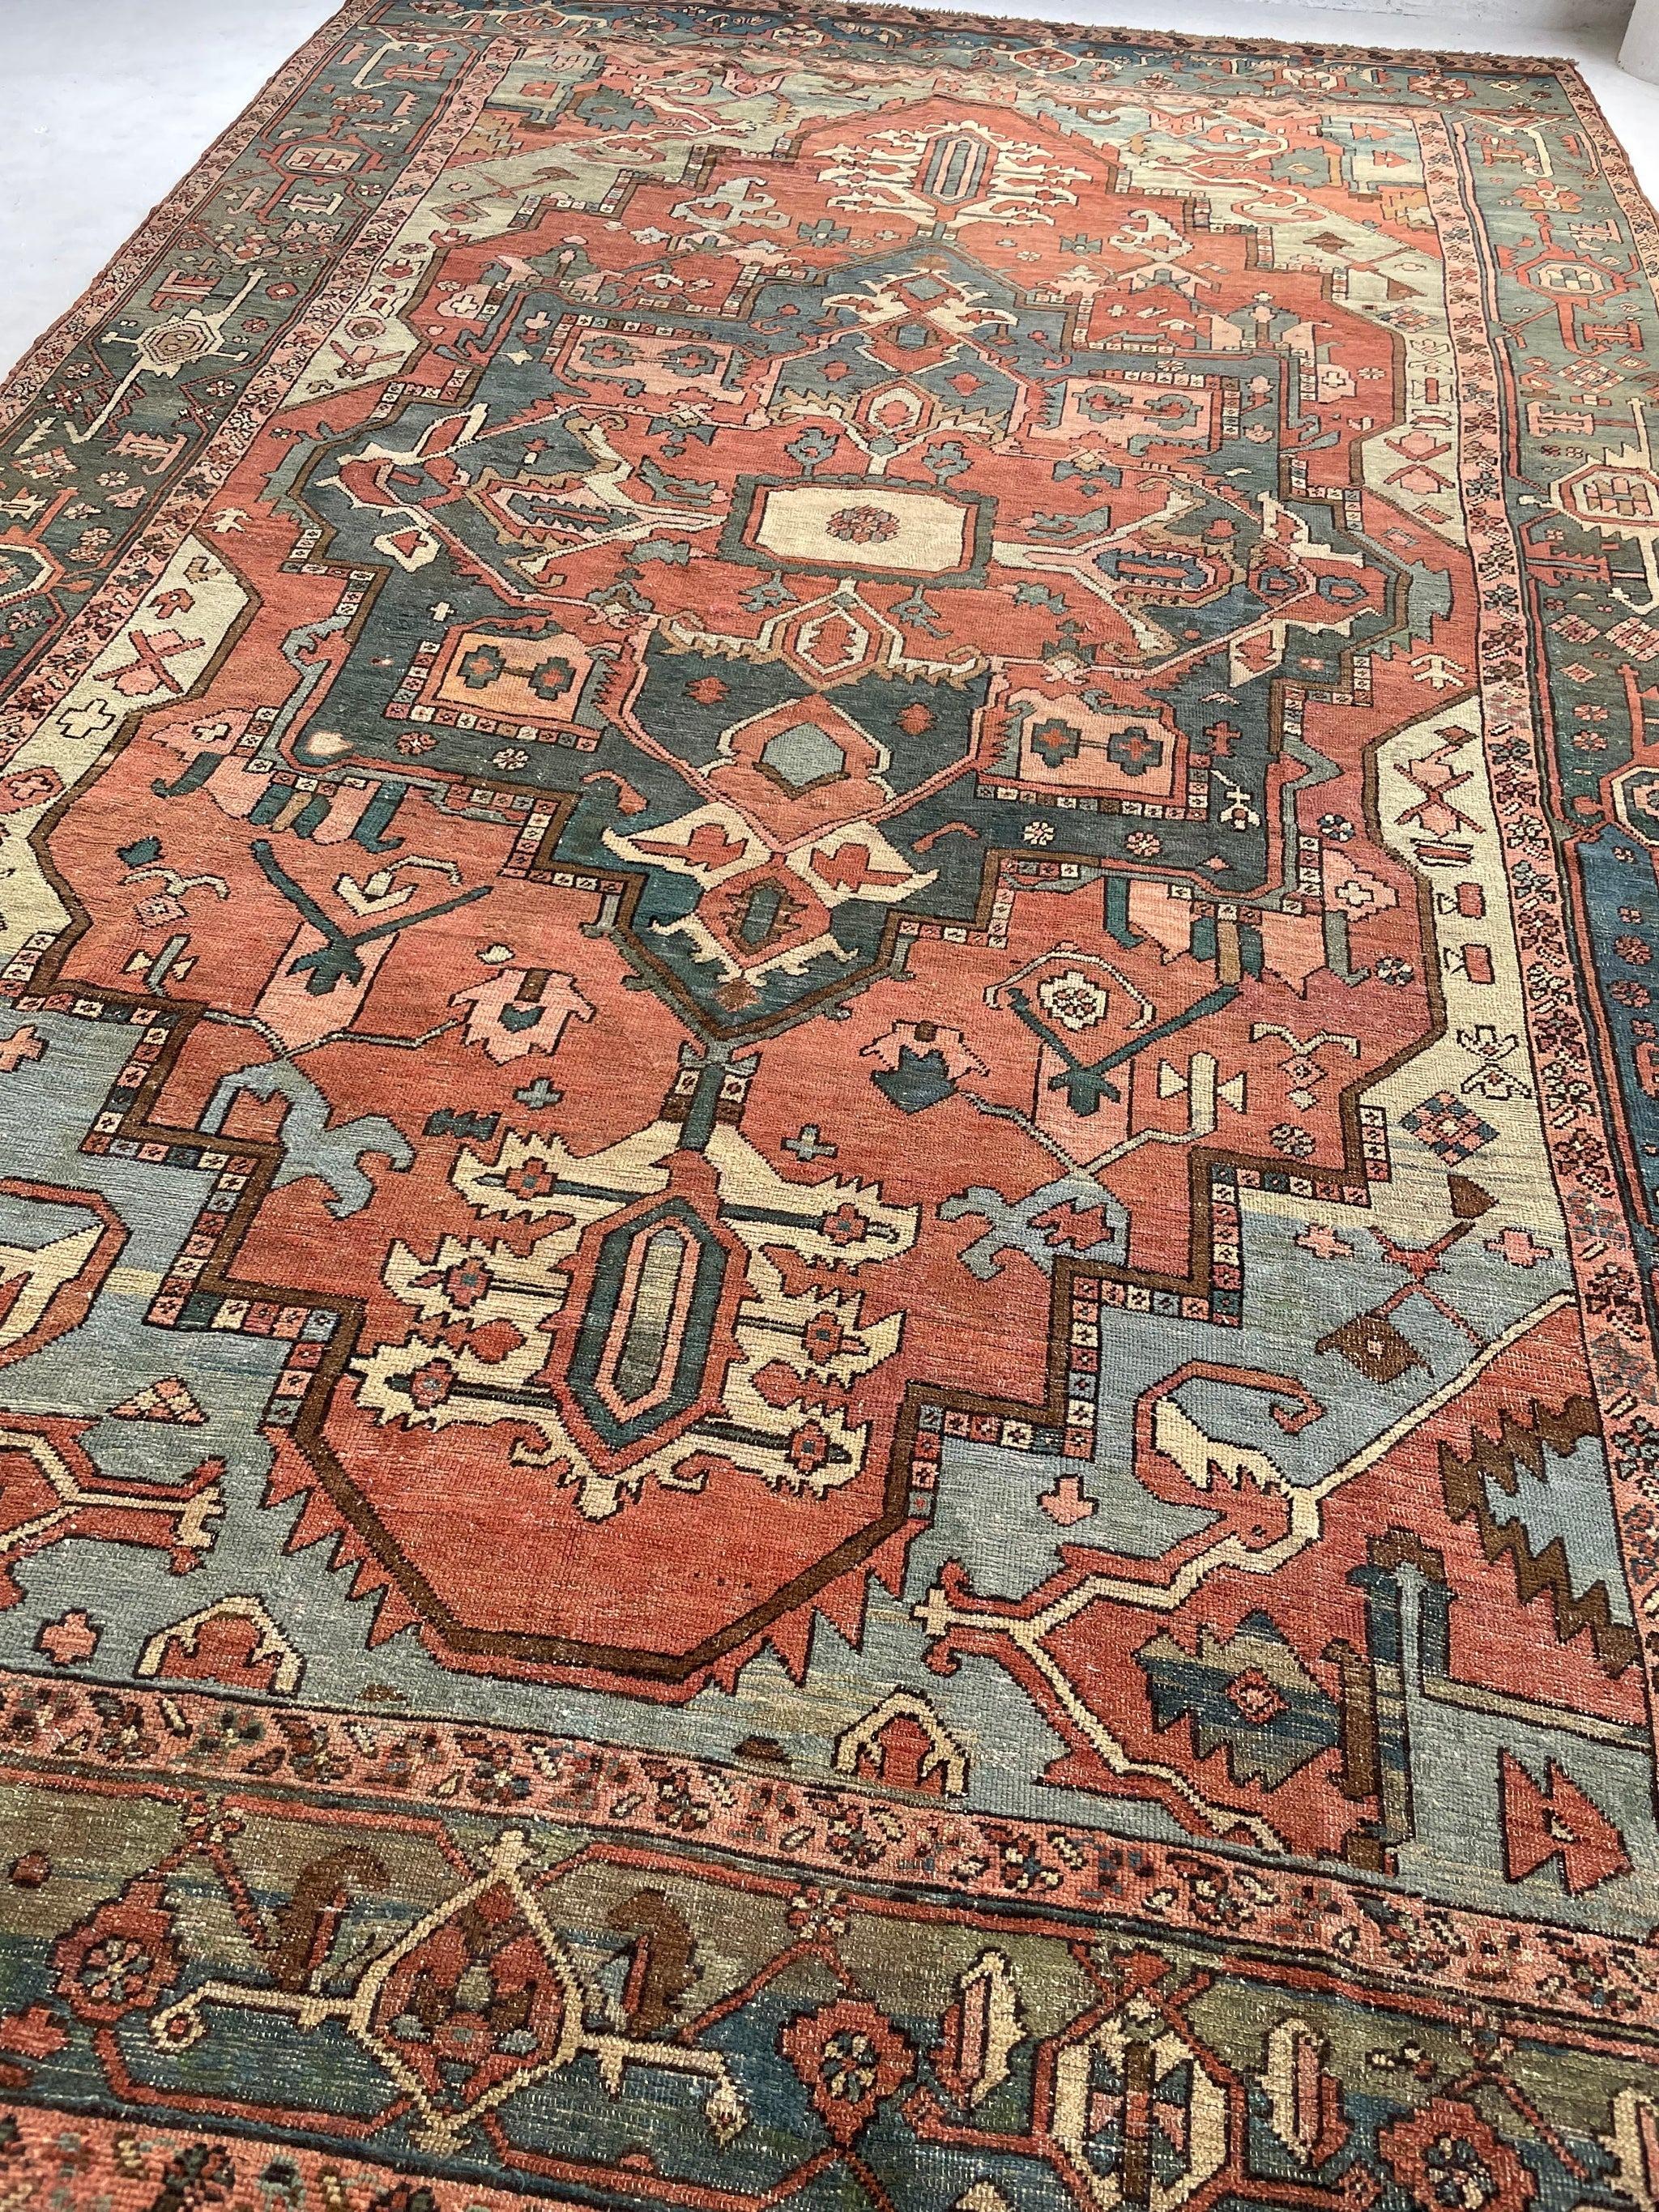 Pablo Picasso Antique Persian Serapi - Truest Mystical Art - Museum Piece - Terracotta, Sage Green, Ice Blue, Madder-Root, Eggshell

About: UNMATCHED. 1 OF 1. Never again will we lay eyes on something like this in the rug world.  These are pieces